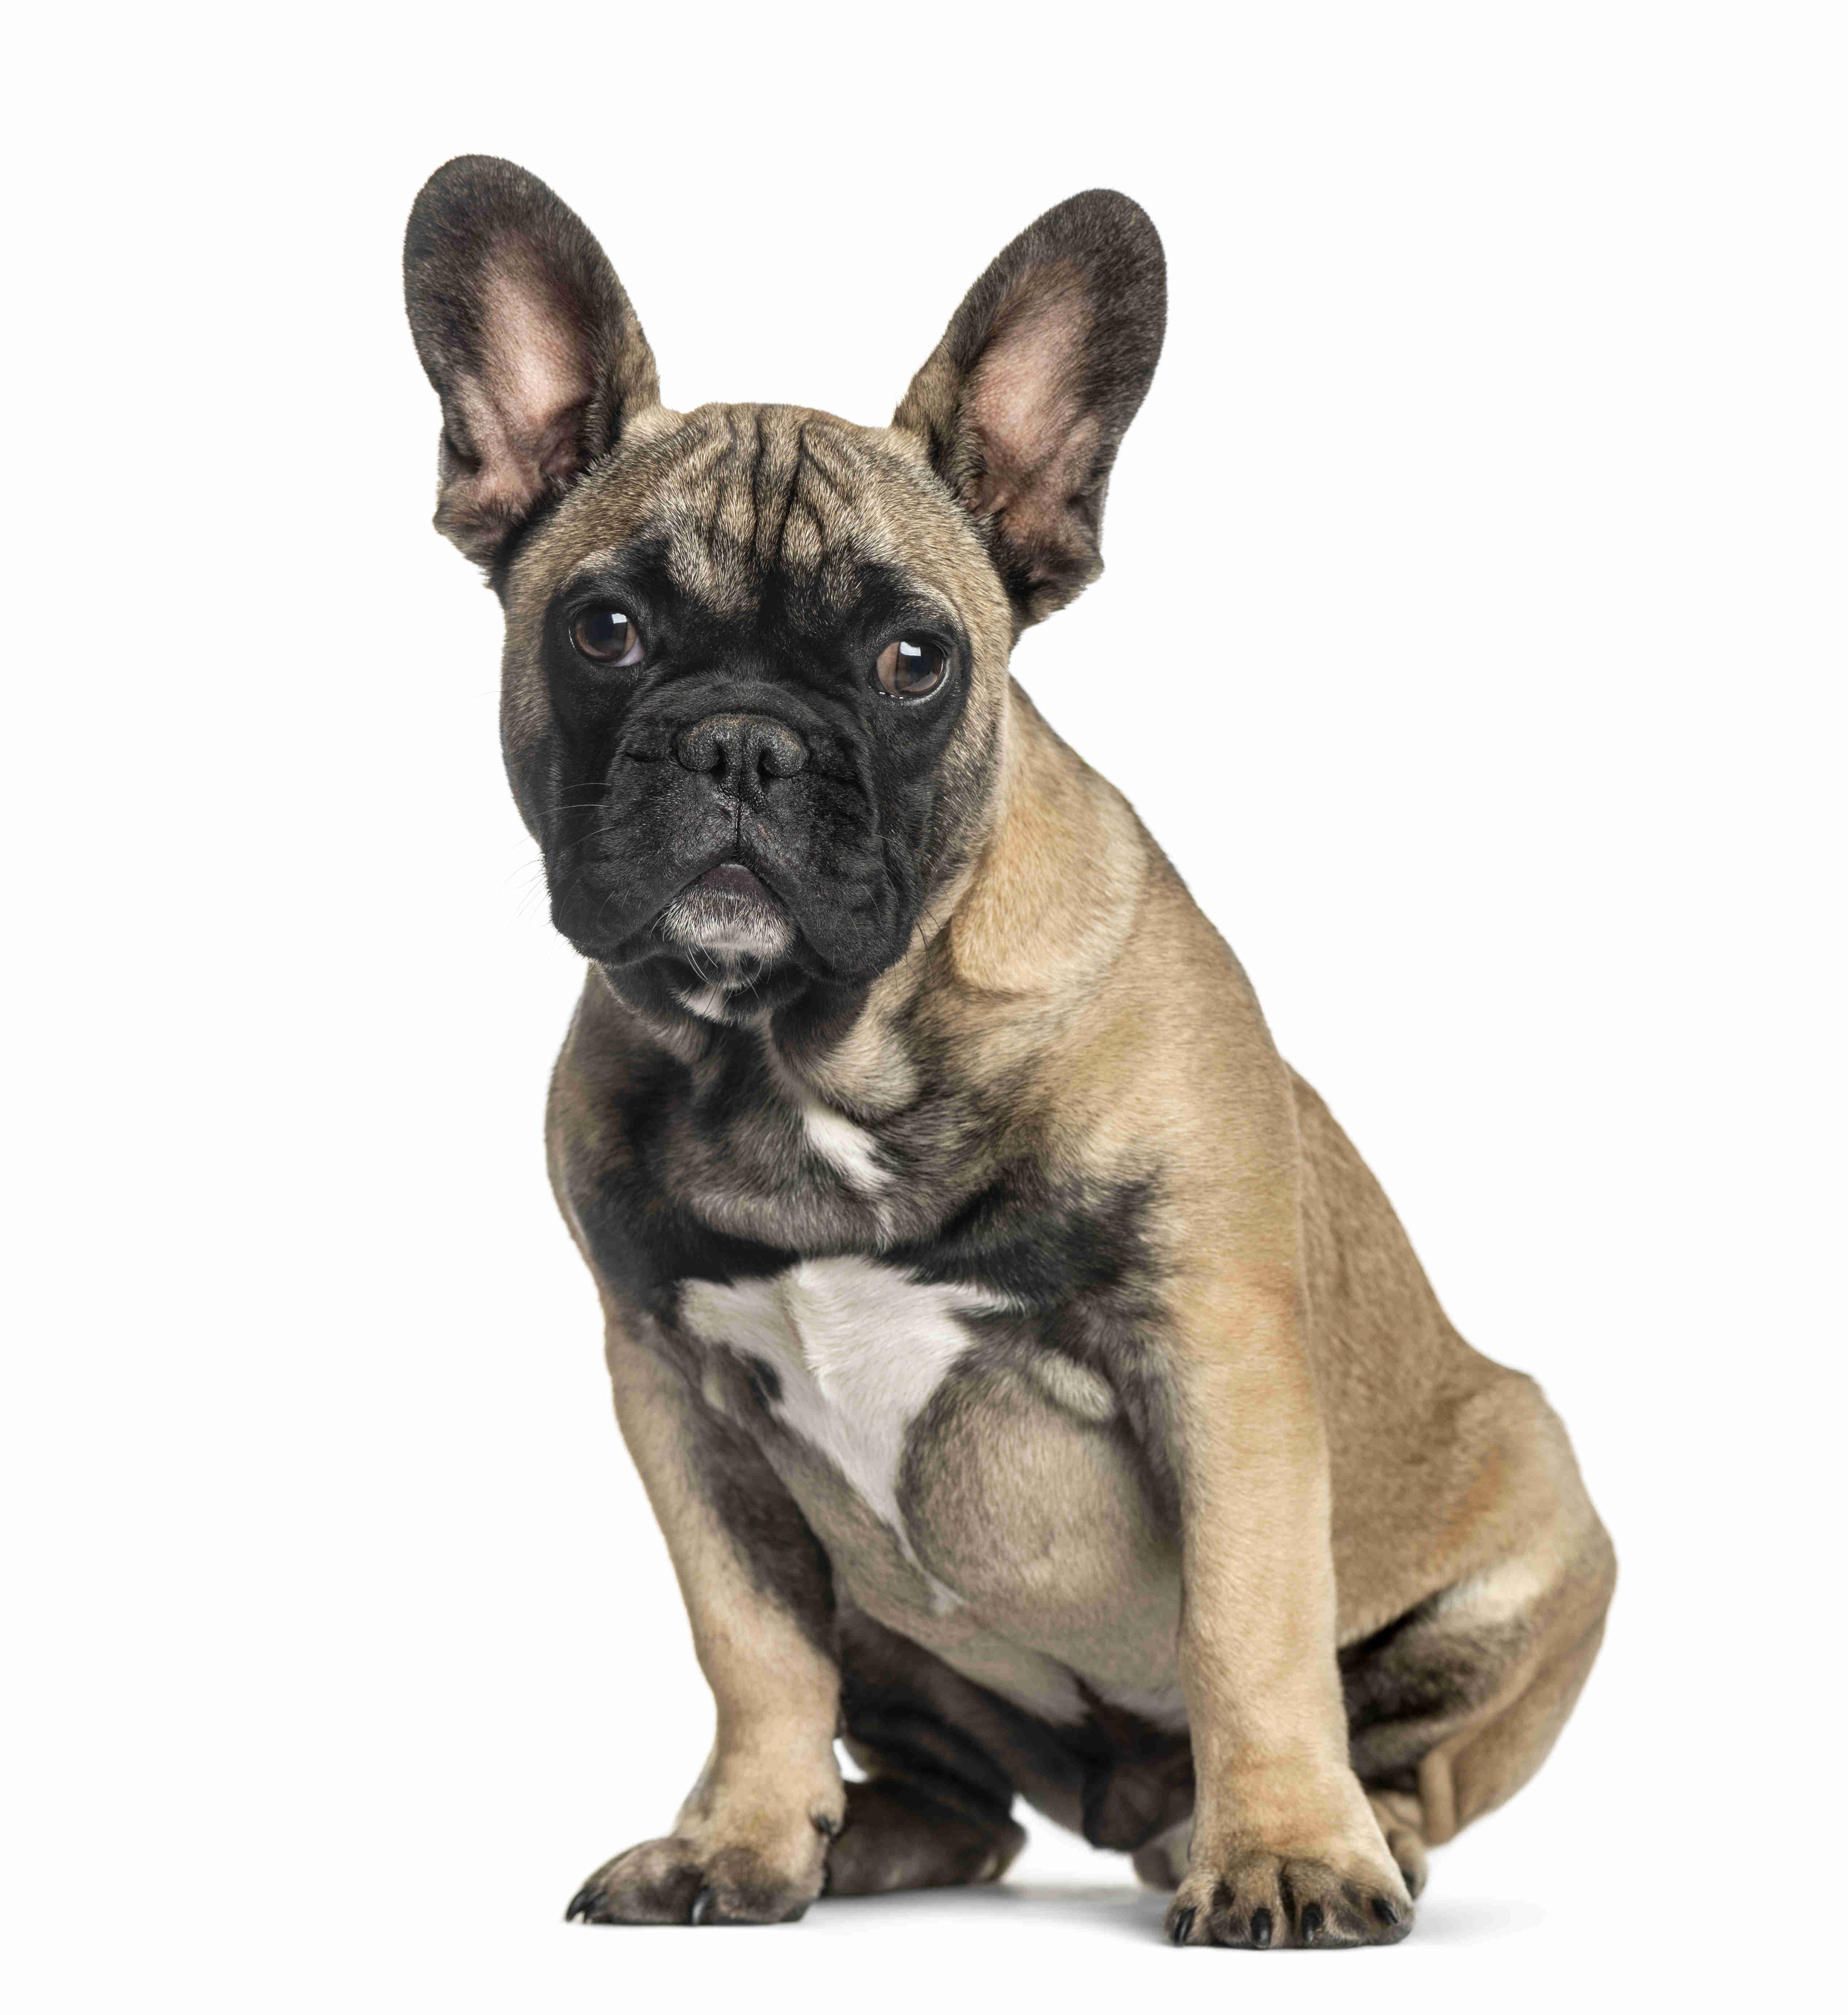 Conquering Canine Fears: Tips to Help Your French Bulldog Overcome Stair and Household Obstacles